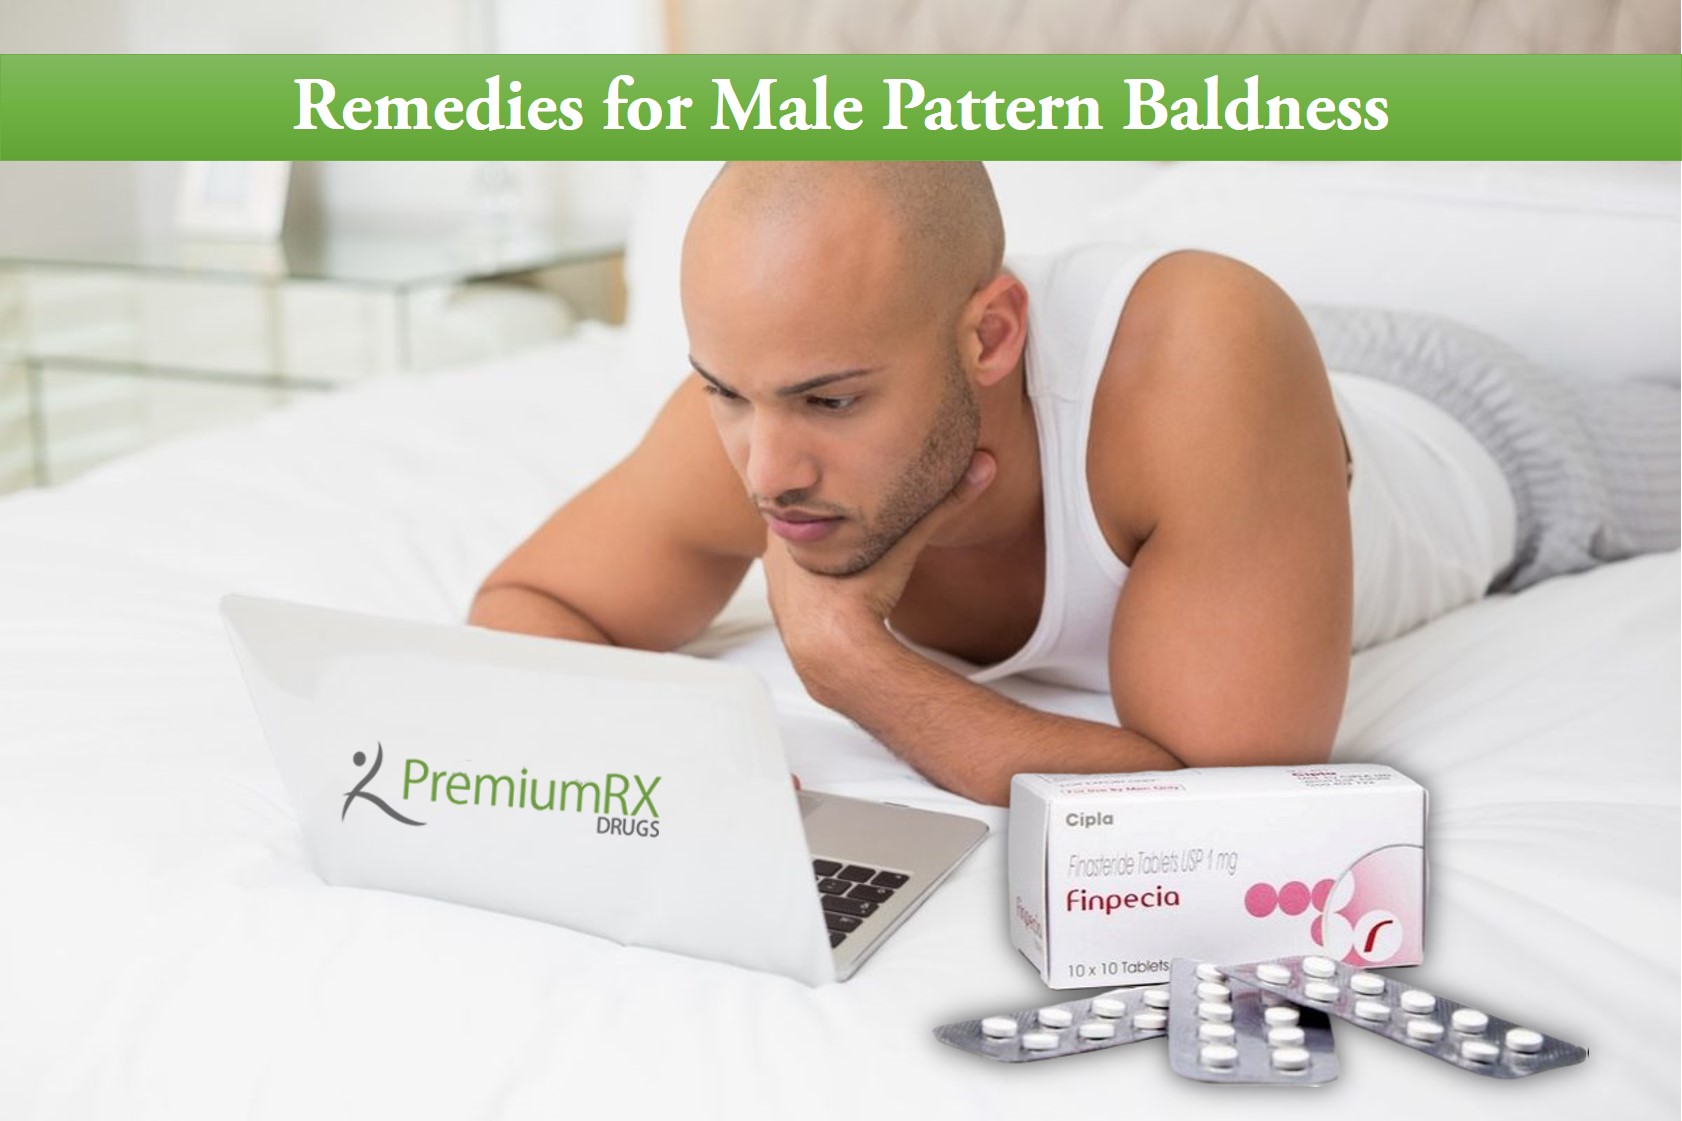 Remedies for Male Pattern Baldness